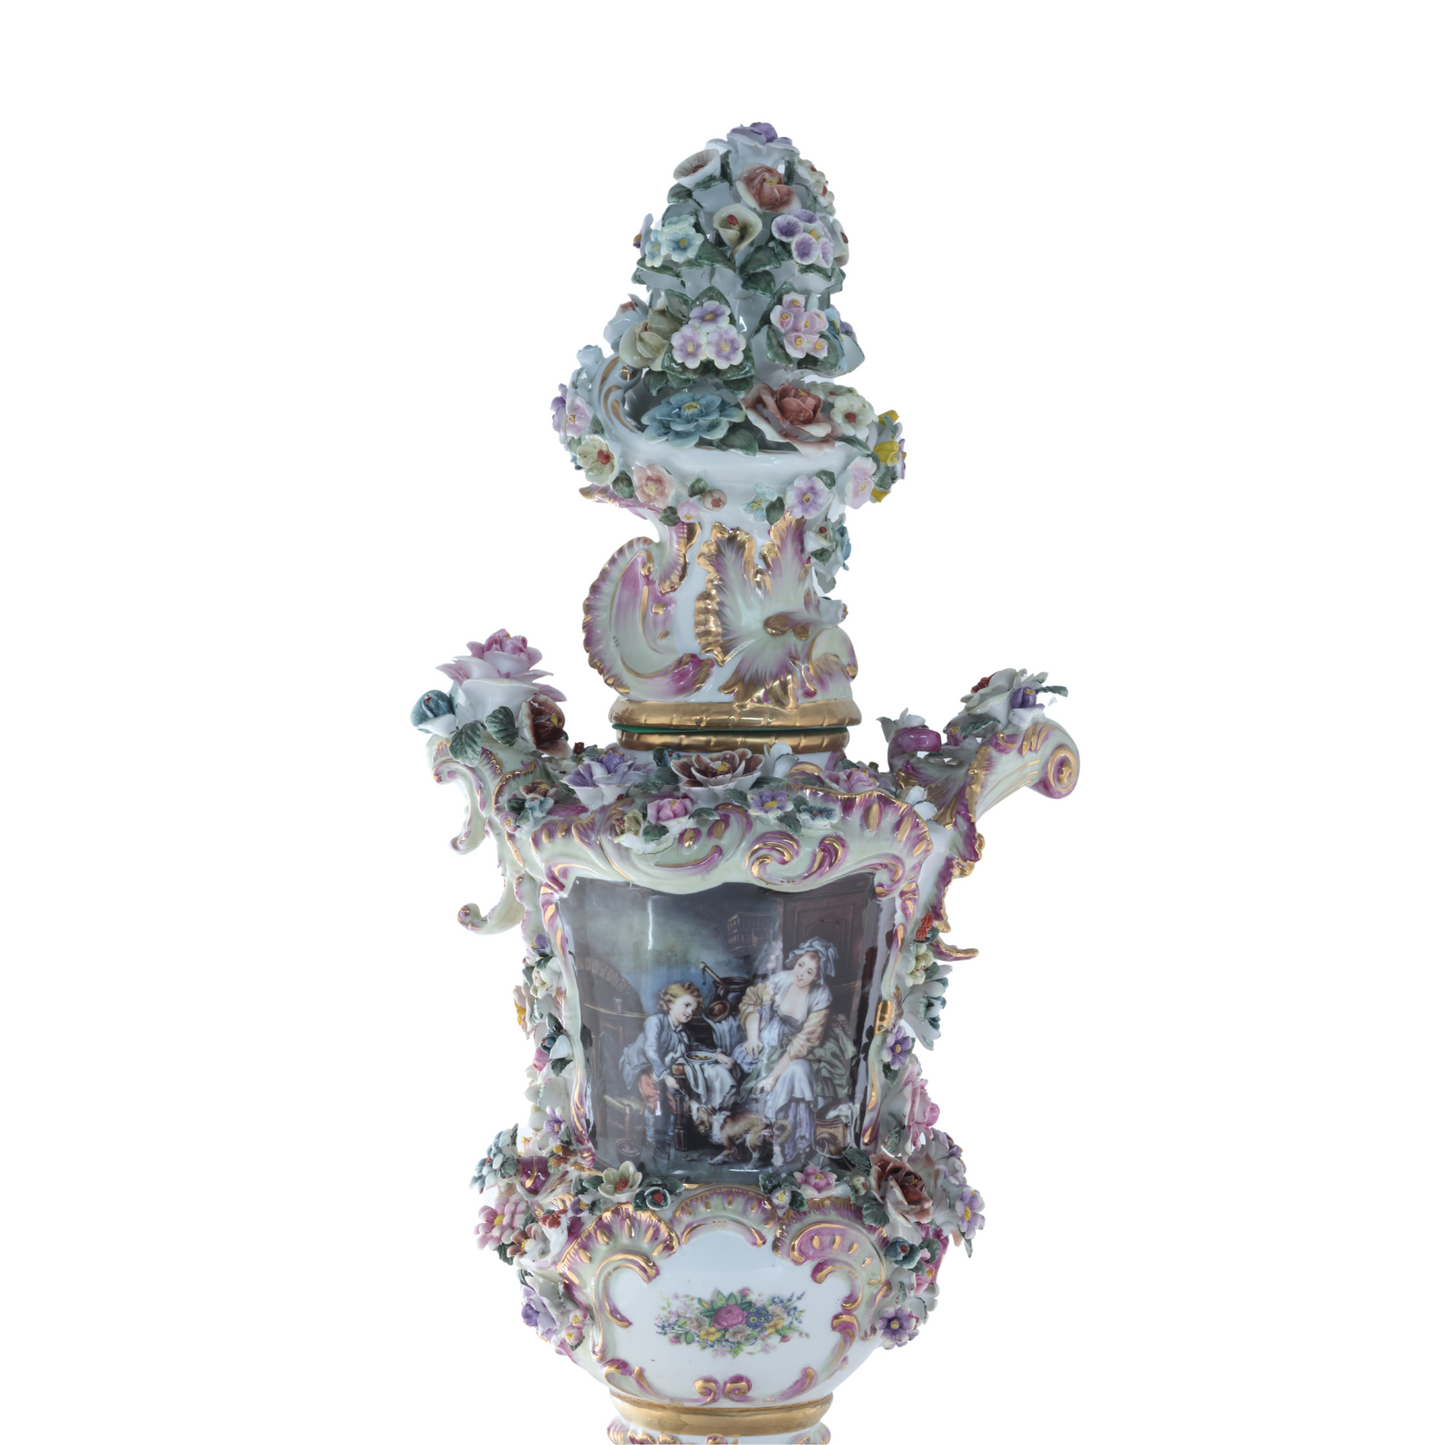 Three Dimensional Hand-painted Louis XV Style Porcelain Flower Urn